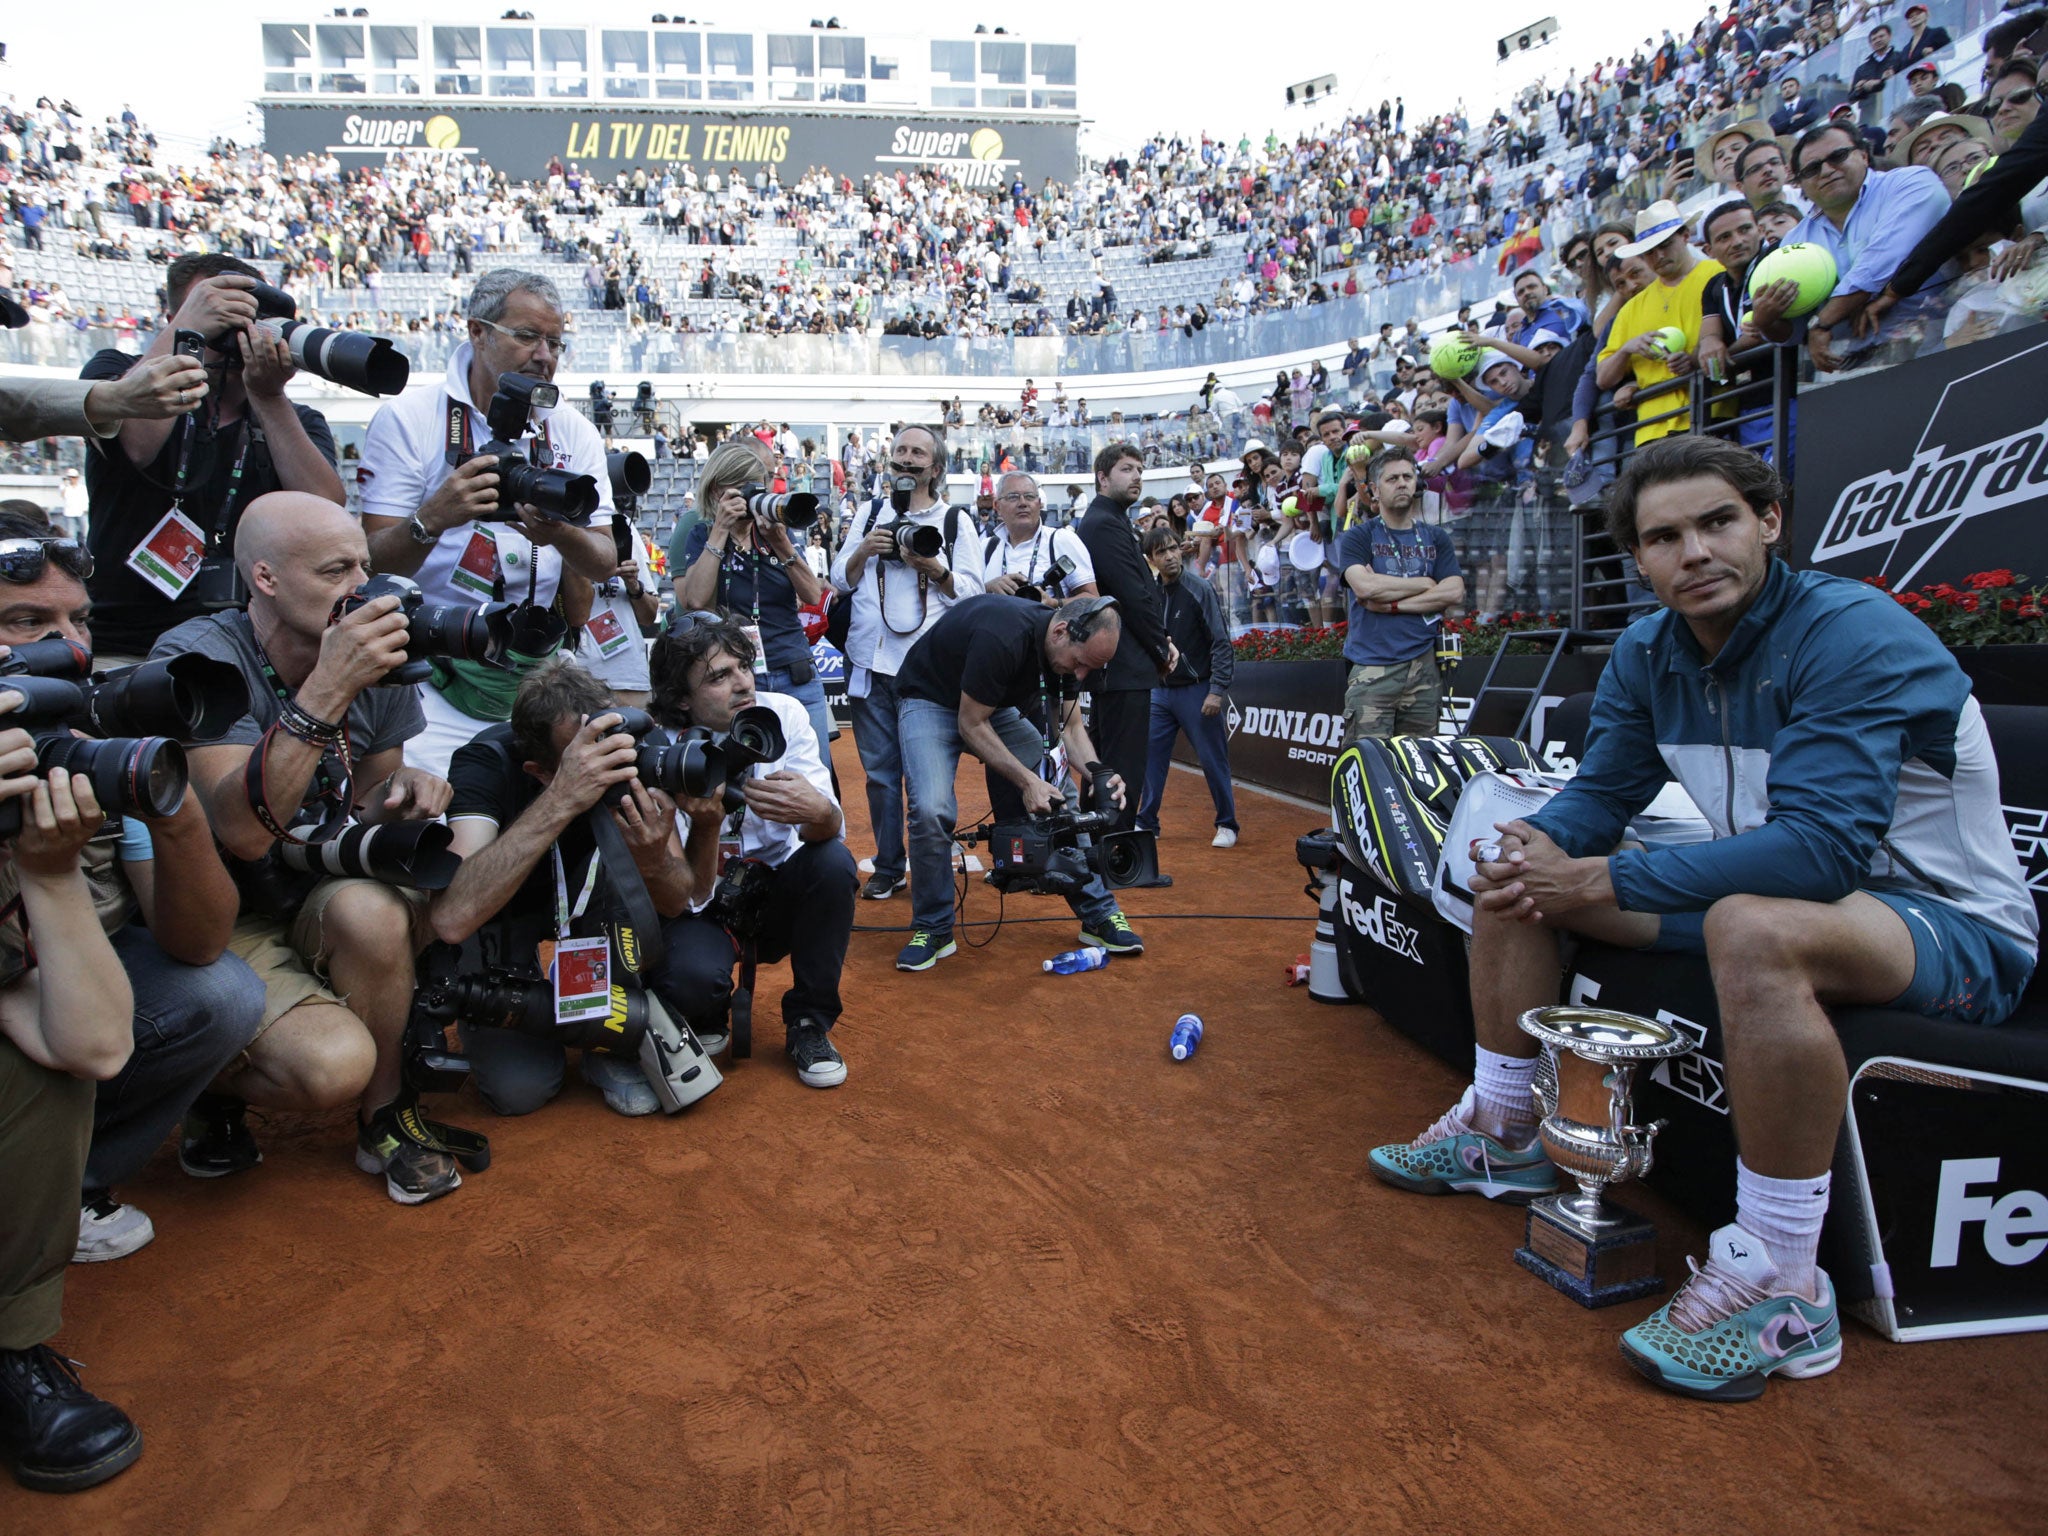 Spain’s Rafael Nadal with the trophy after thrashing Roger Federer in Rome